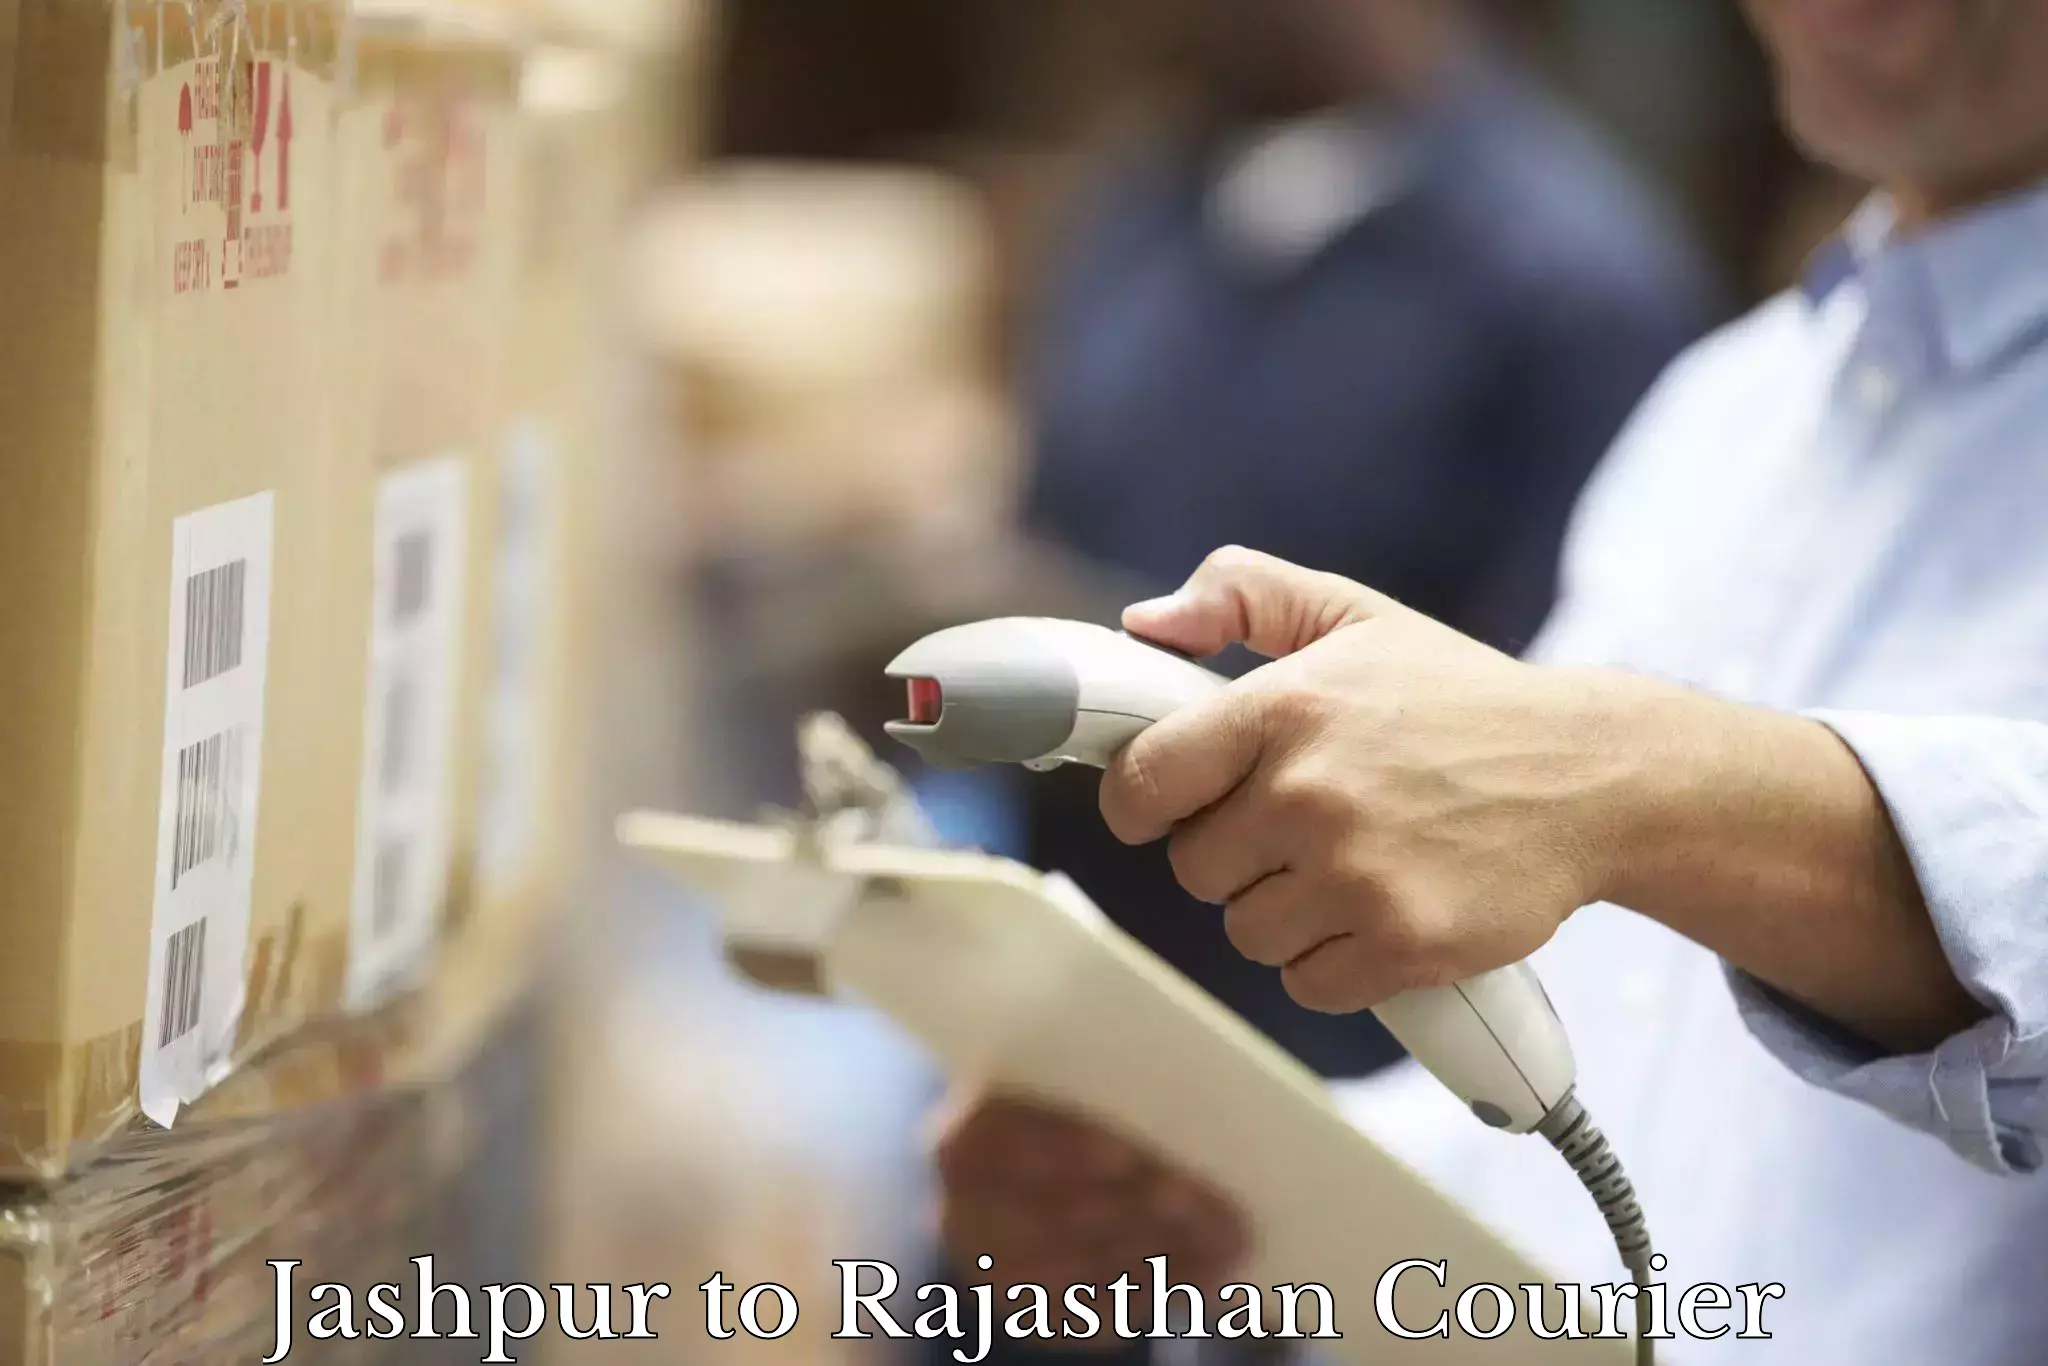 Reliable delivery network Jashpur to IIIT Kota